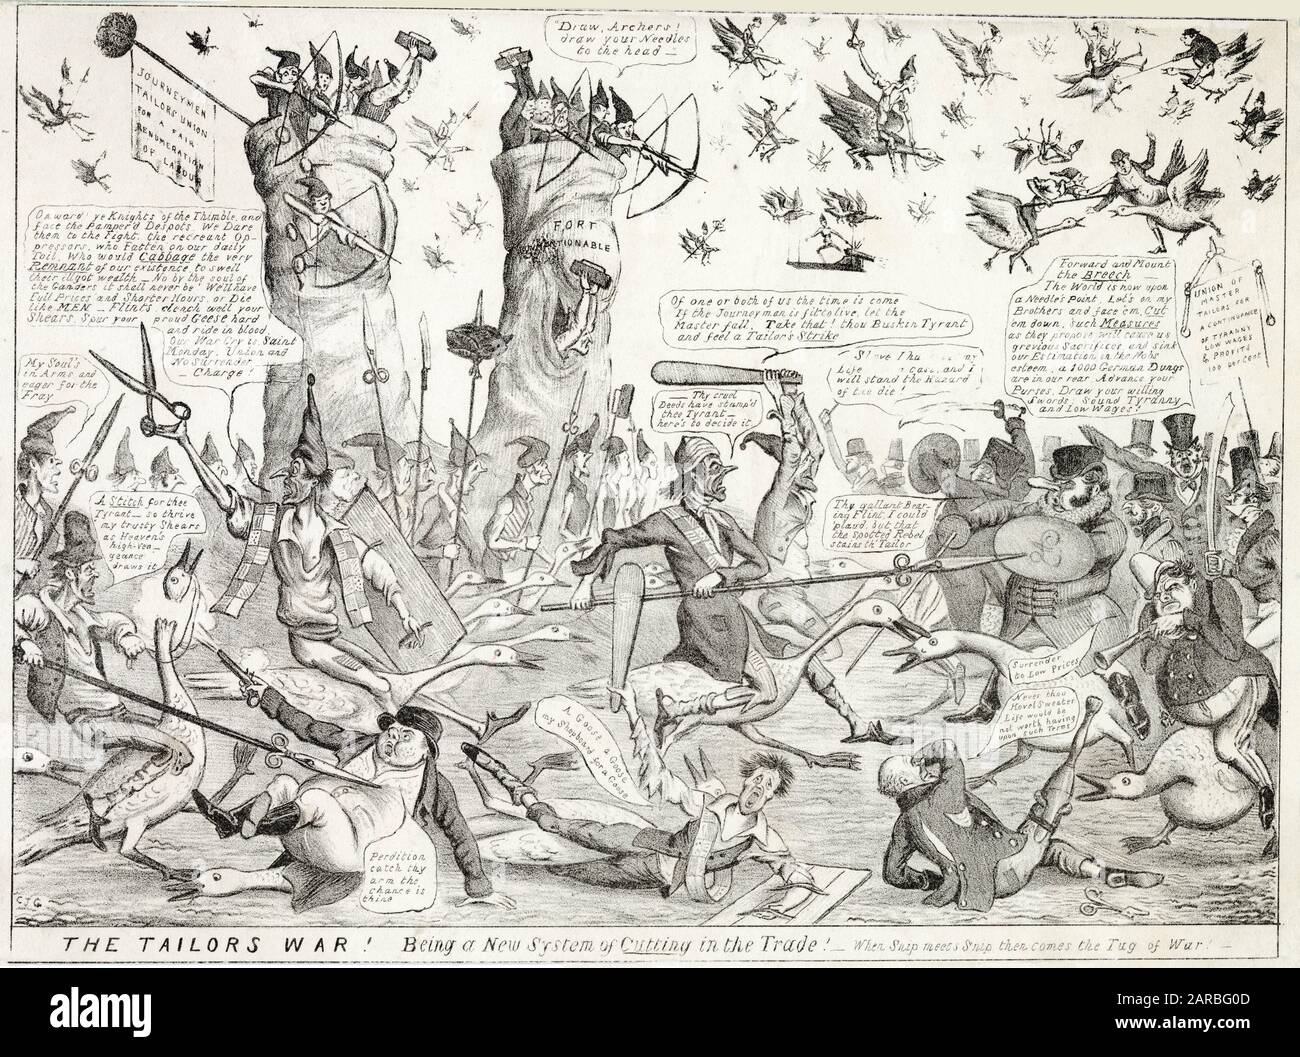 Cartoon, The Tailors War! Being a New System of Cutting in the Trade! - When Snip meets Snip then comes the Tug of War.  A satirical comment on unionism in the clothing trade, amid concerns about the influx of unskilled labour.      Date: circa 1834 Stock Photo